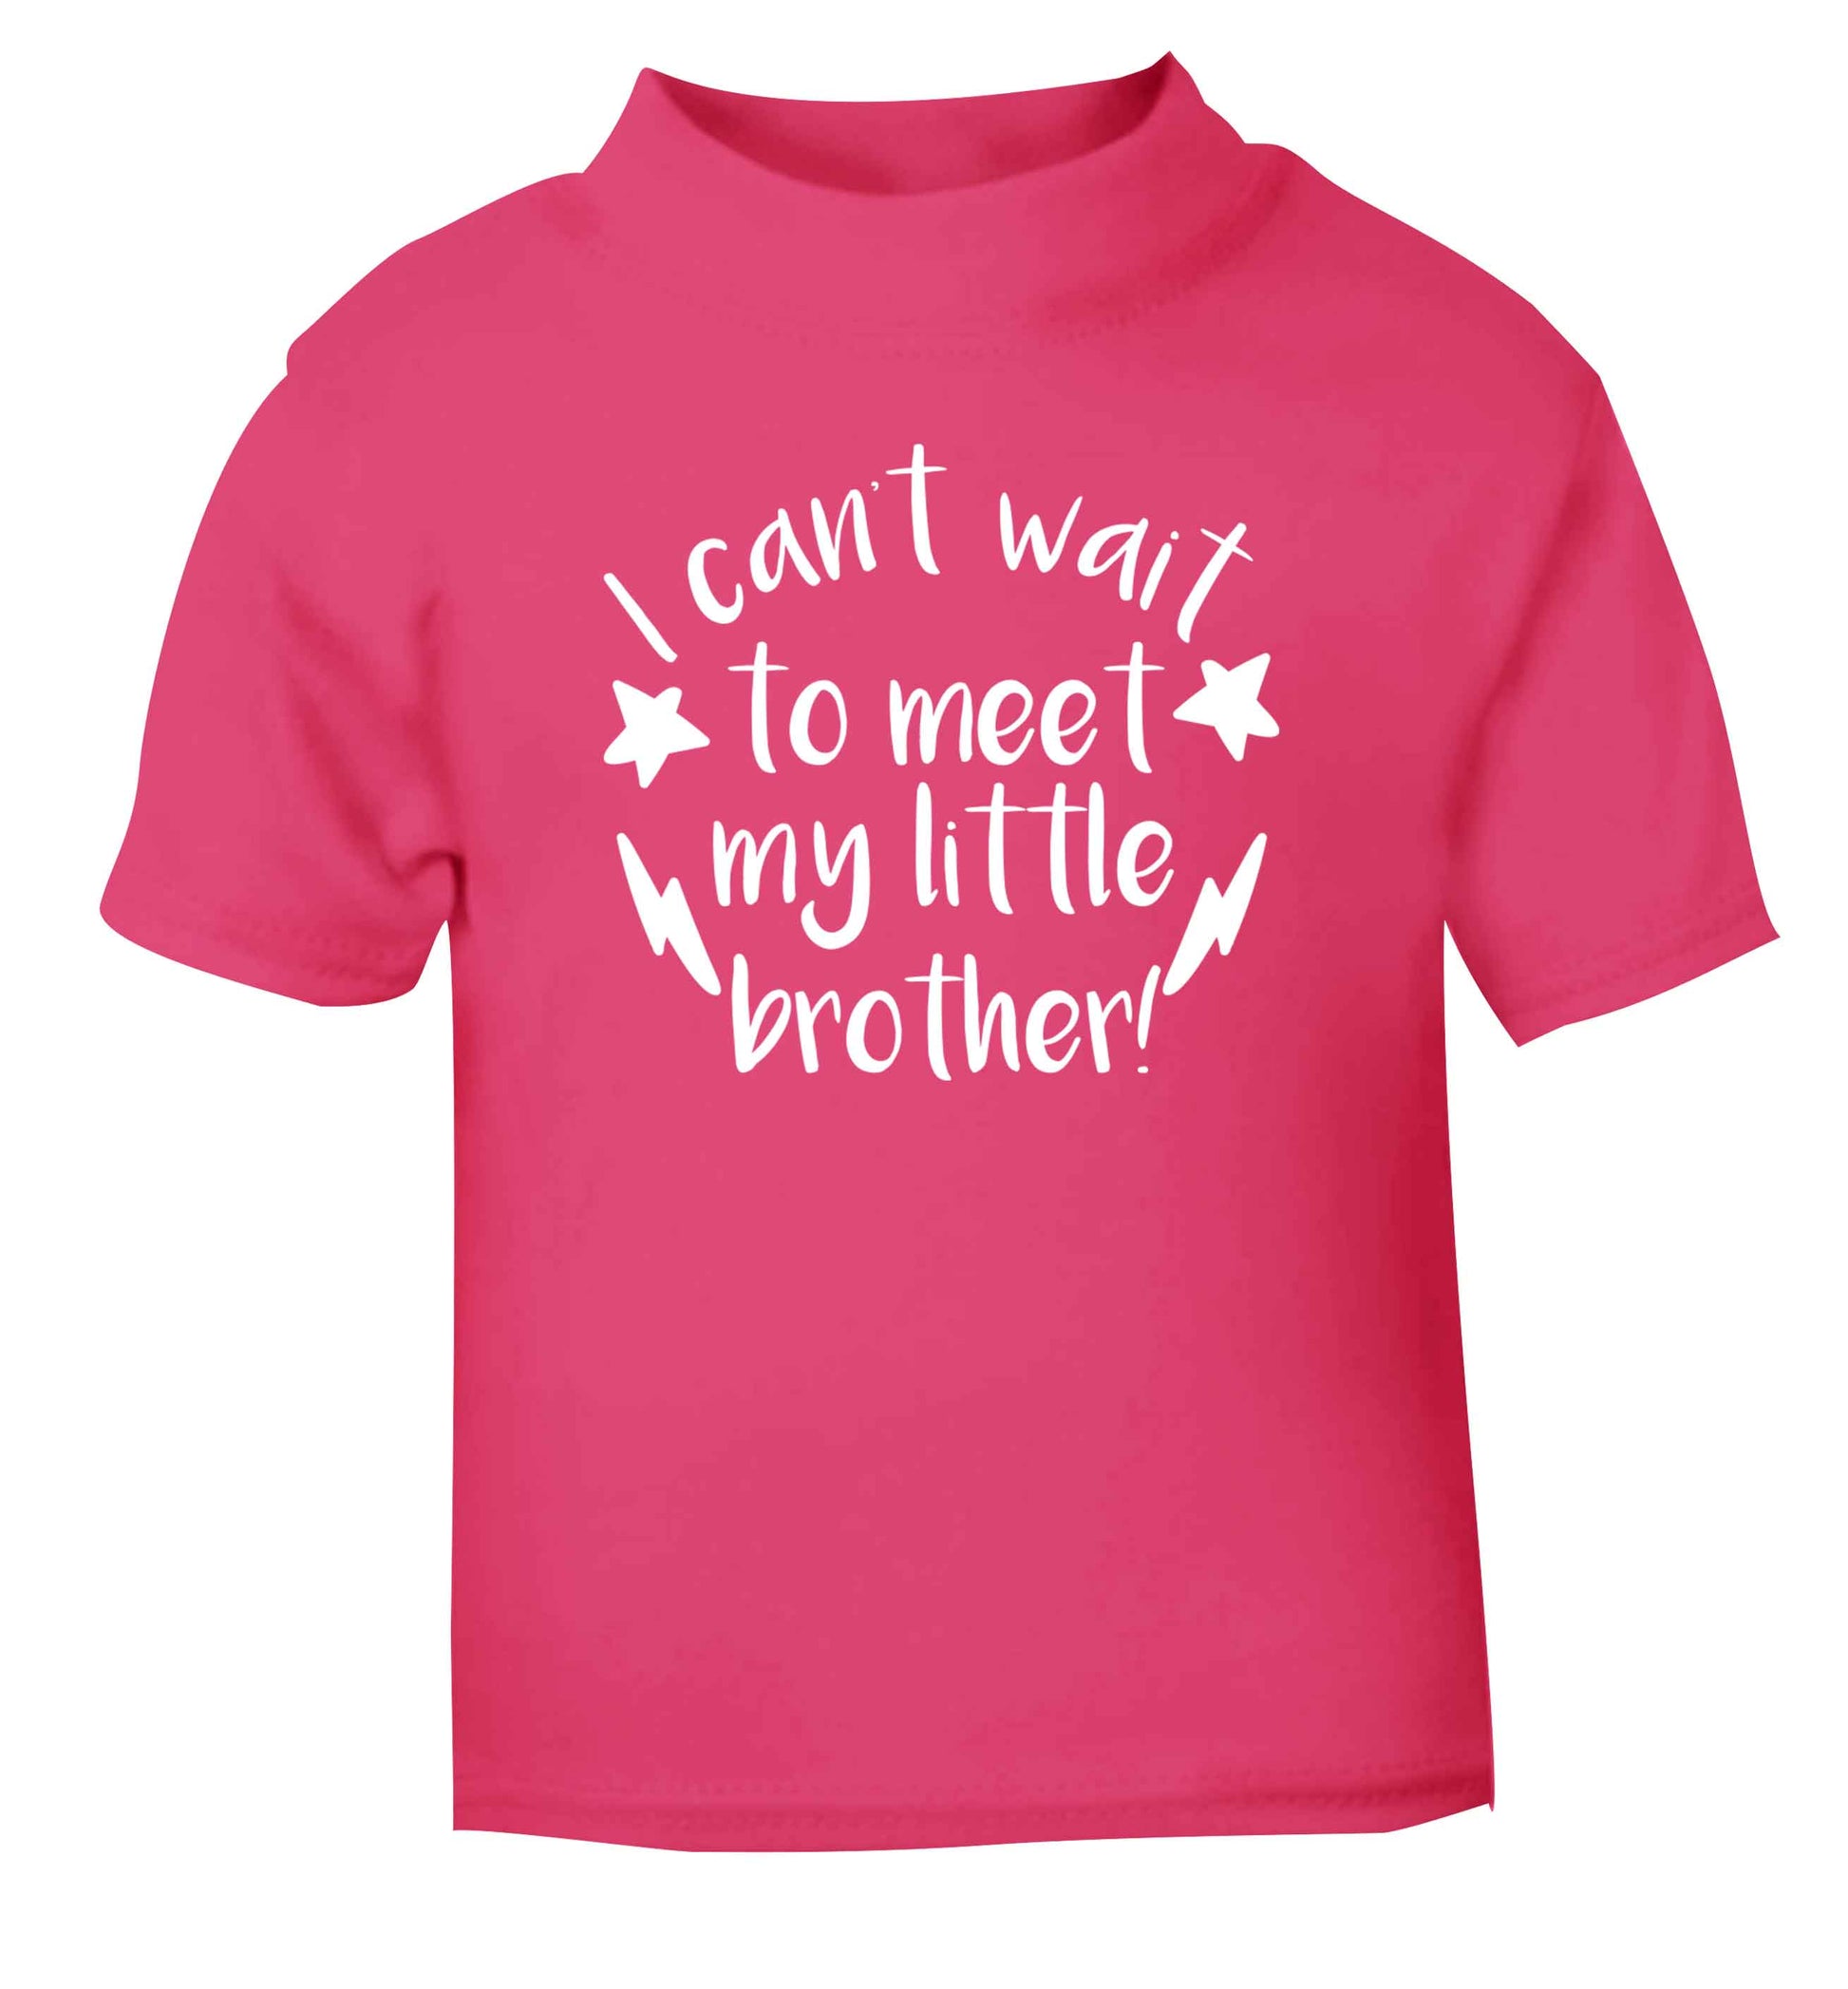 I can't wait to meet my sister! pink Baby Toddler Tshirt 2 Years